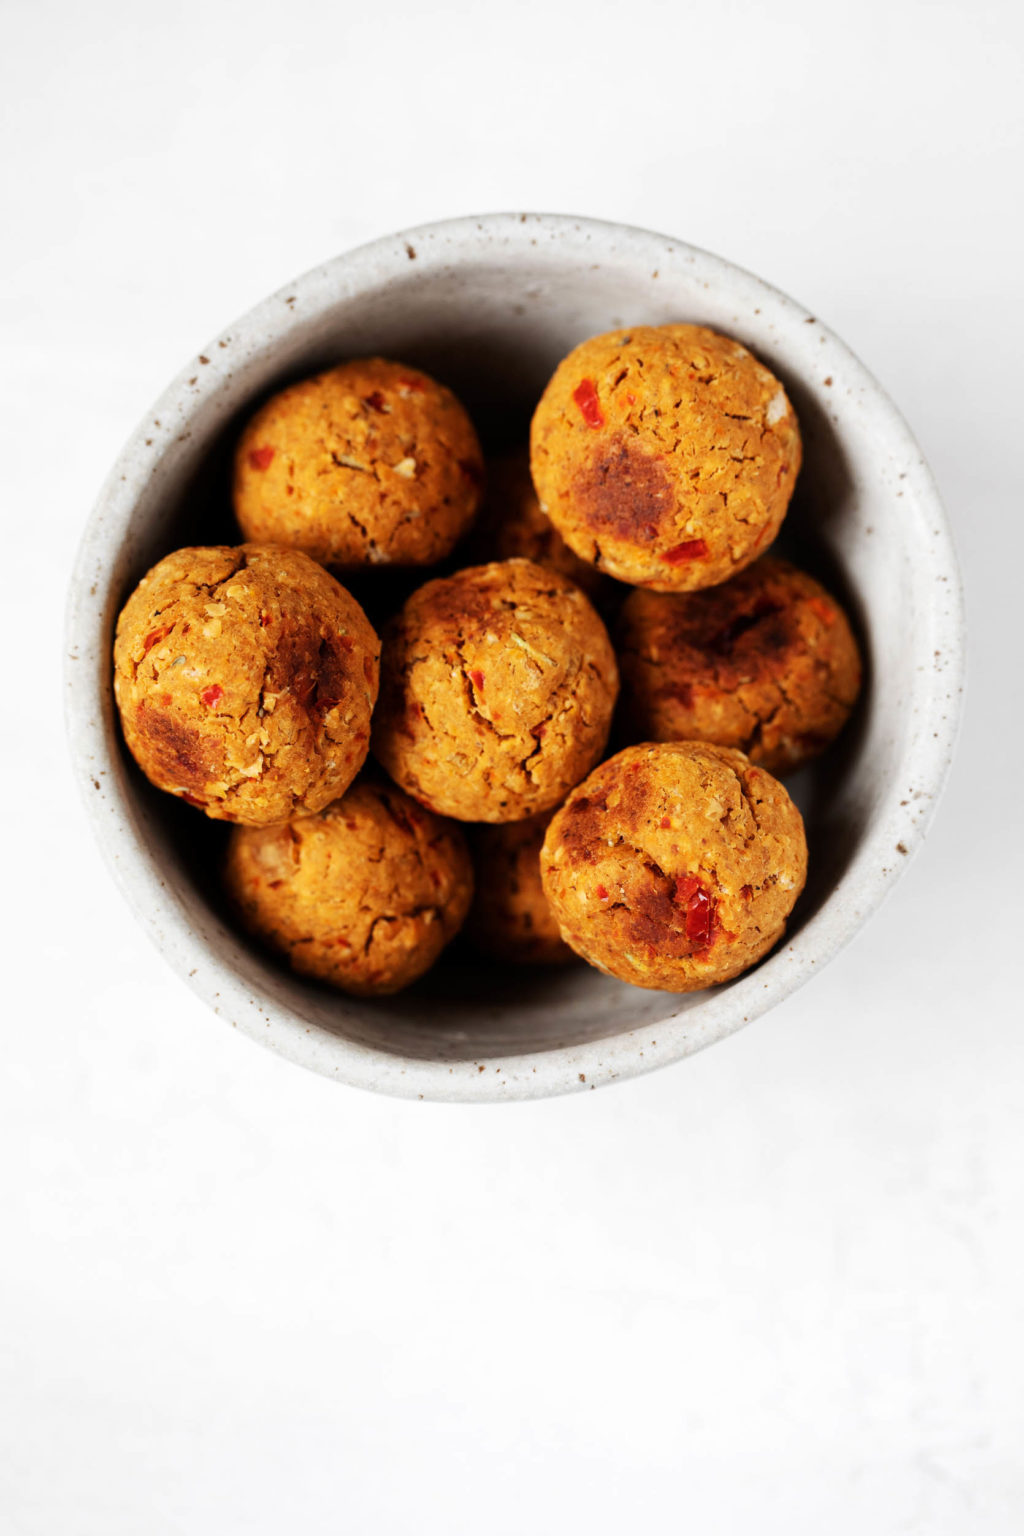 A small white ceramic bowl holds some plant-based, savory meatballs made with chickpeas and oats.